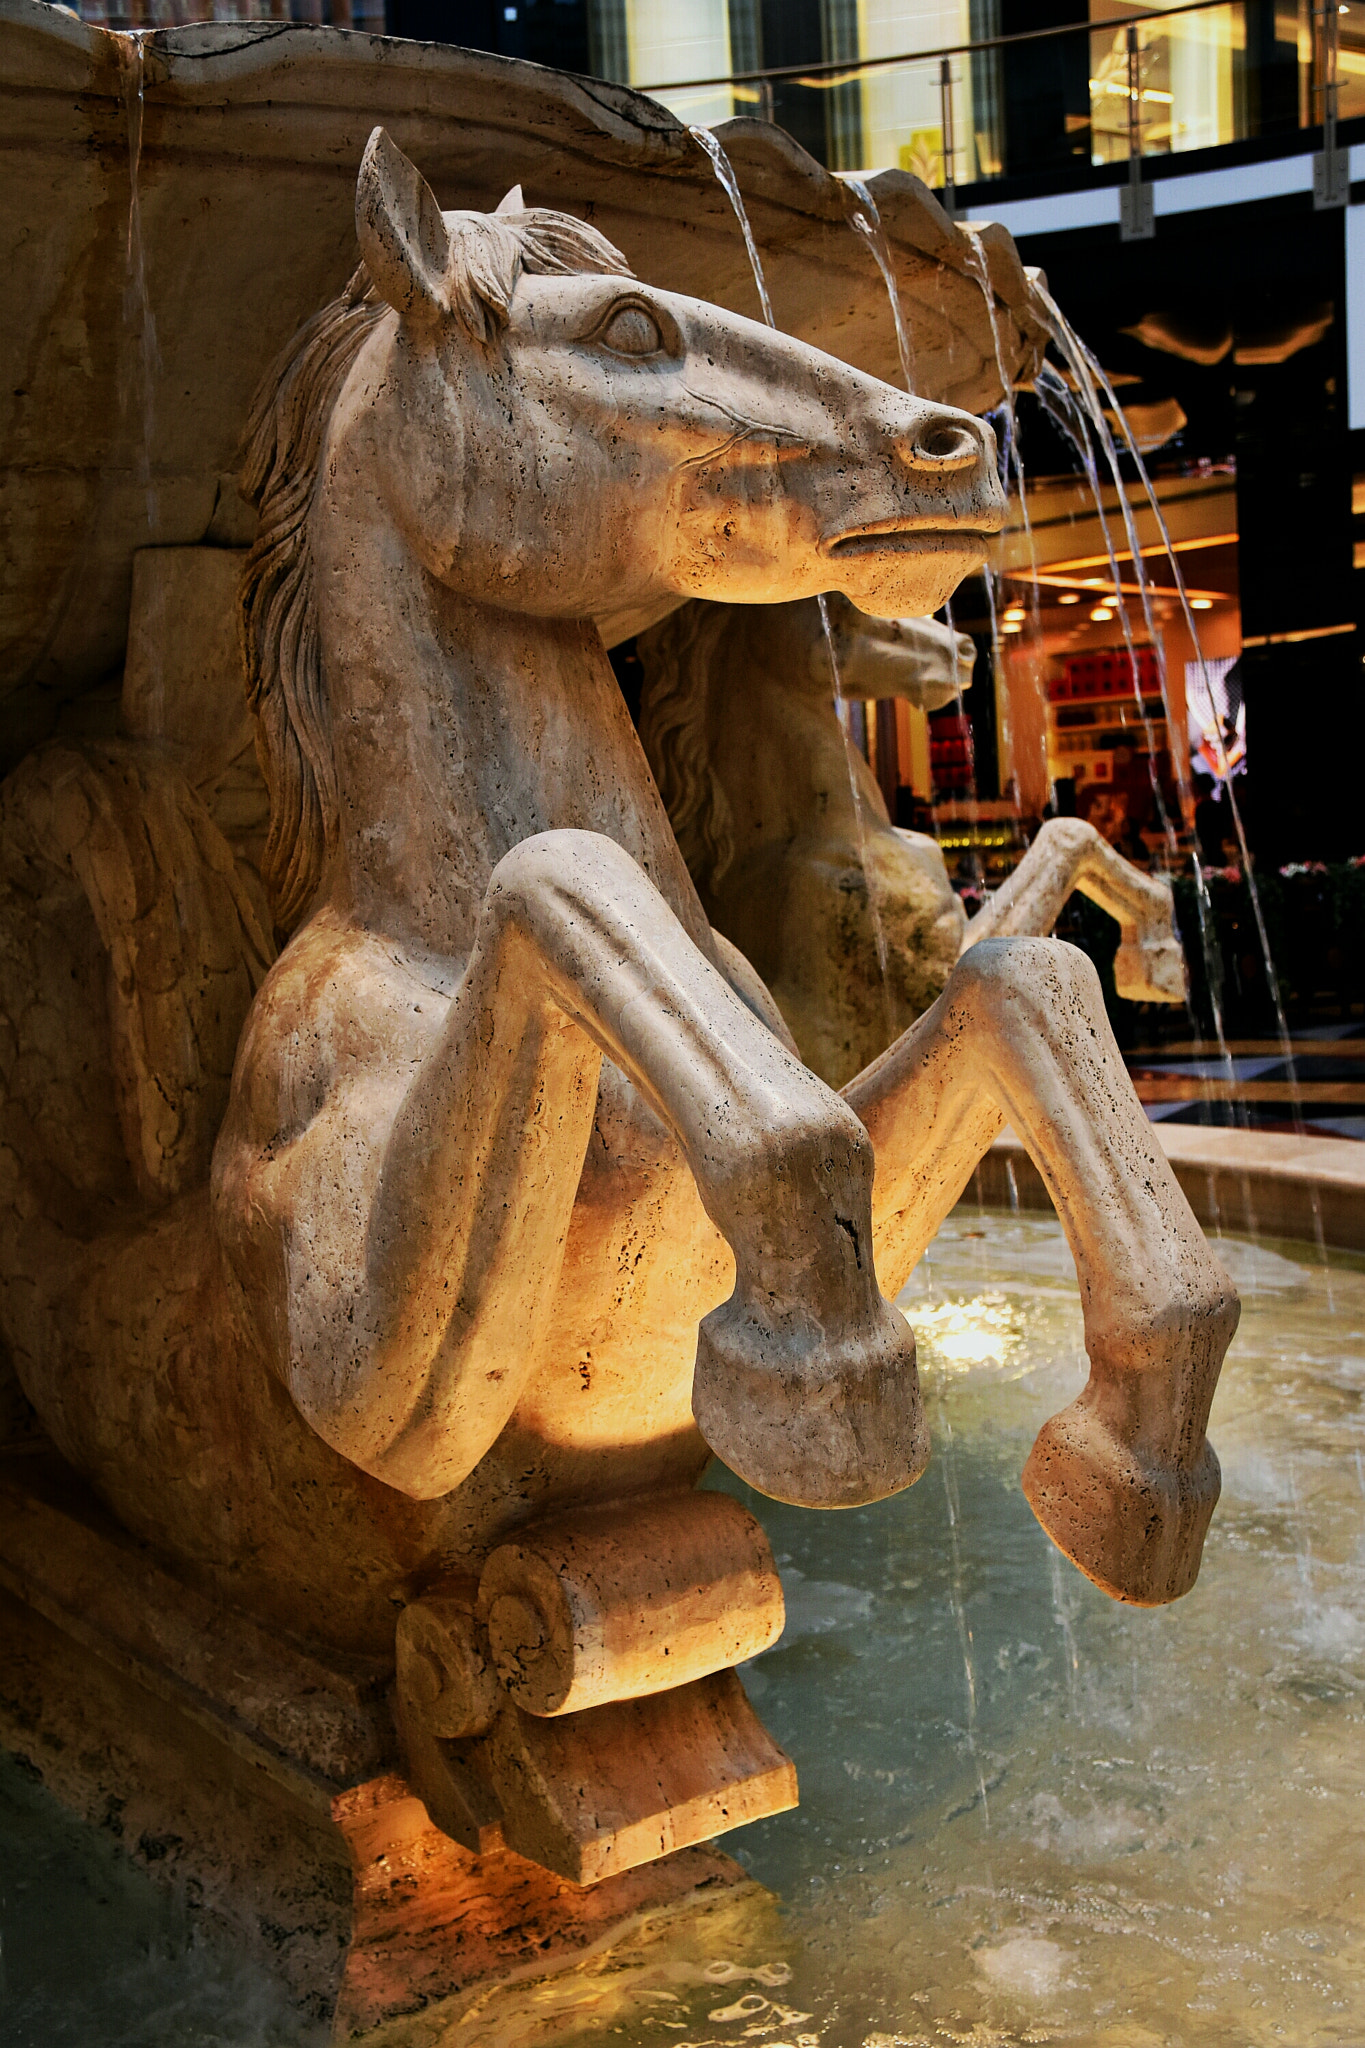 Nikon D7200 + Sigma 17-70mm F2.8-4 DC Macro OS HSM | C sample photo. Horse fountain in mall of emirates photography